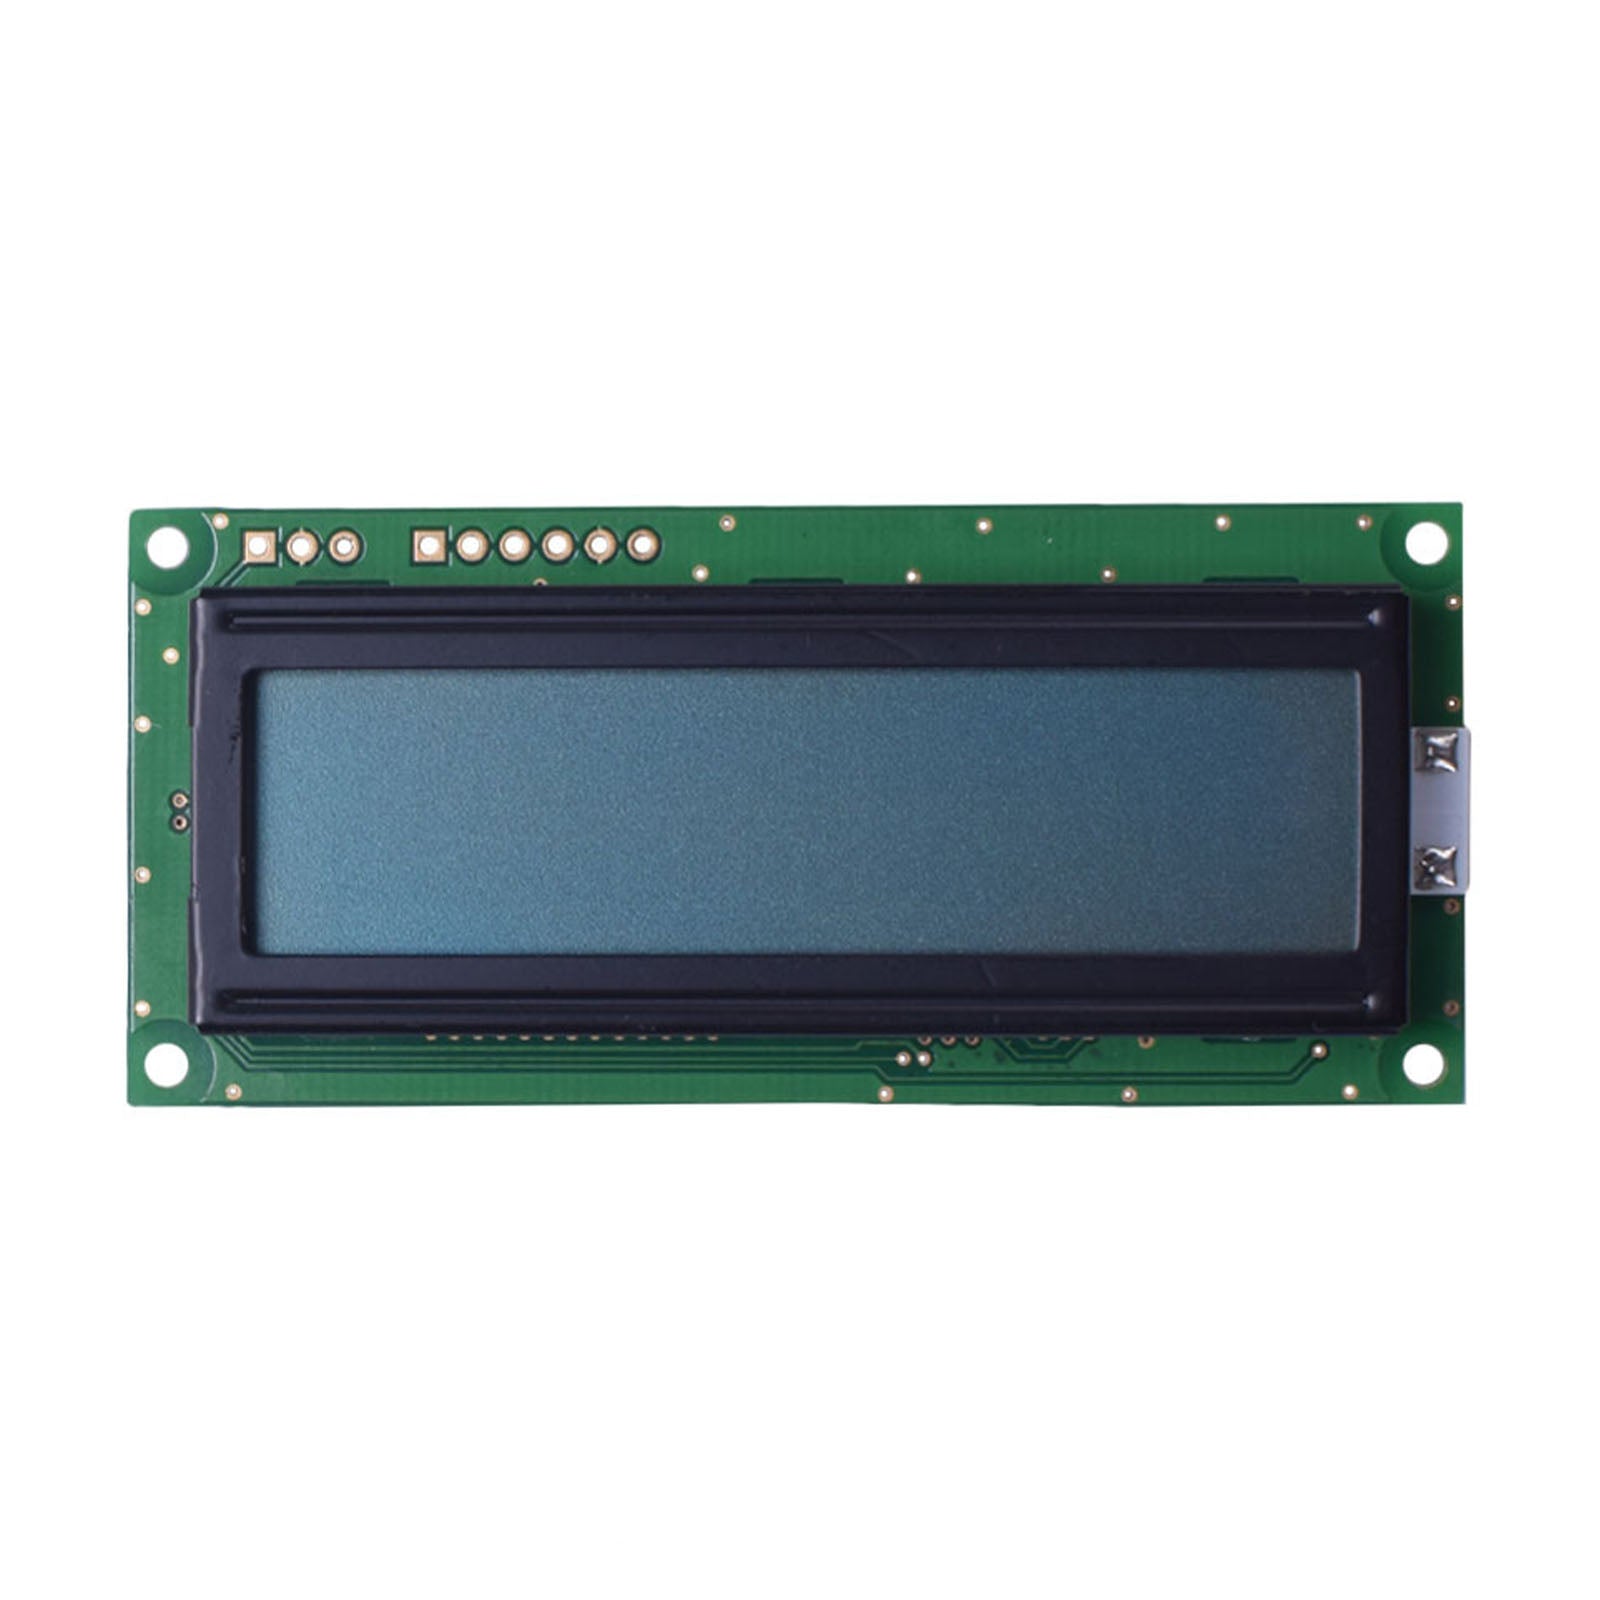 DisplayModule 16x2 Gray Character LCD - RS232, I2C, SPI